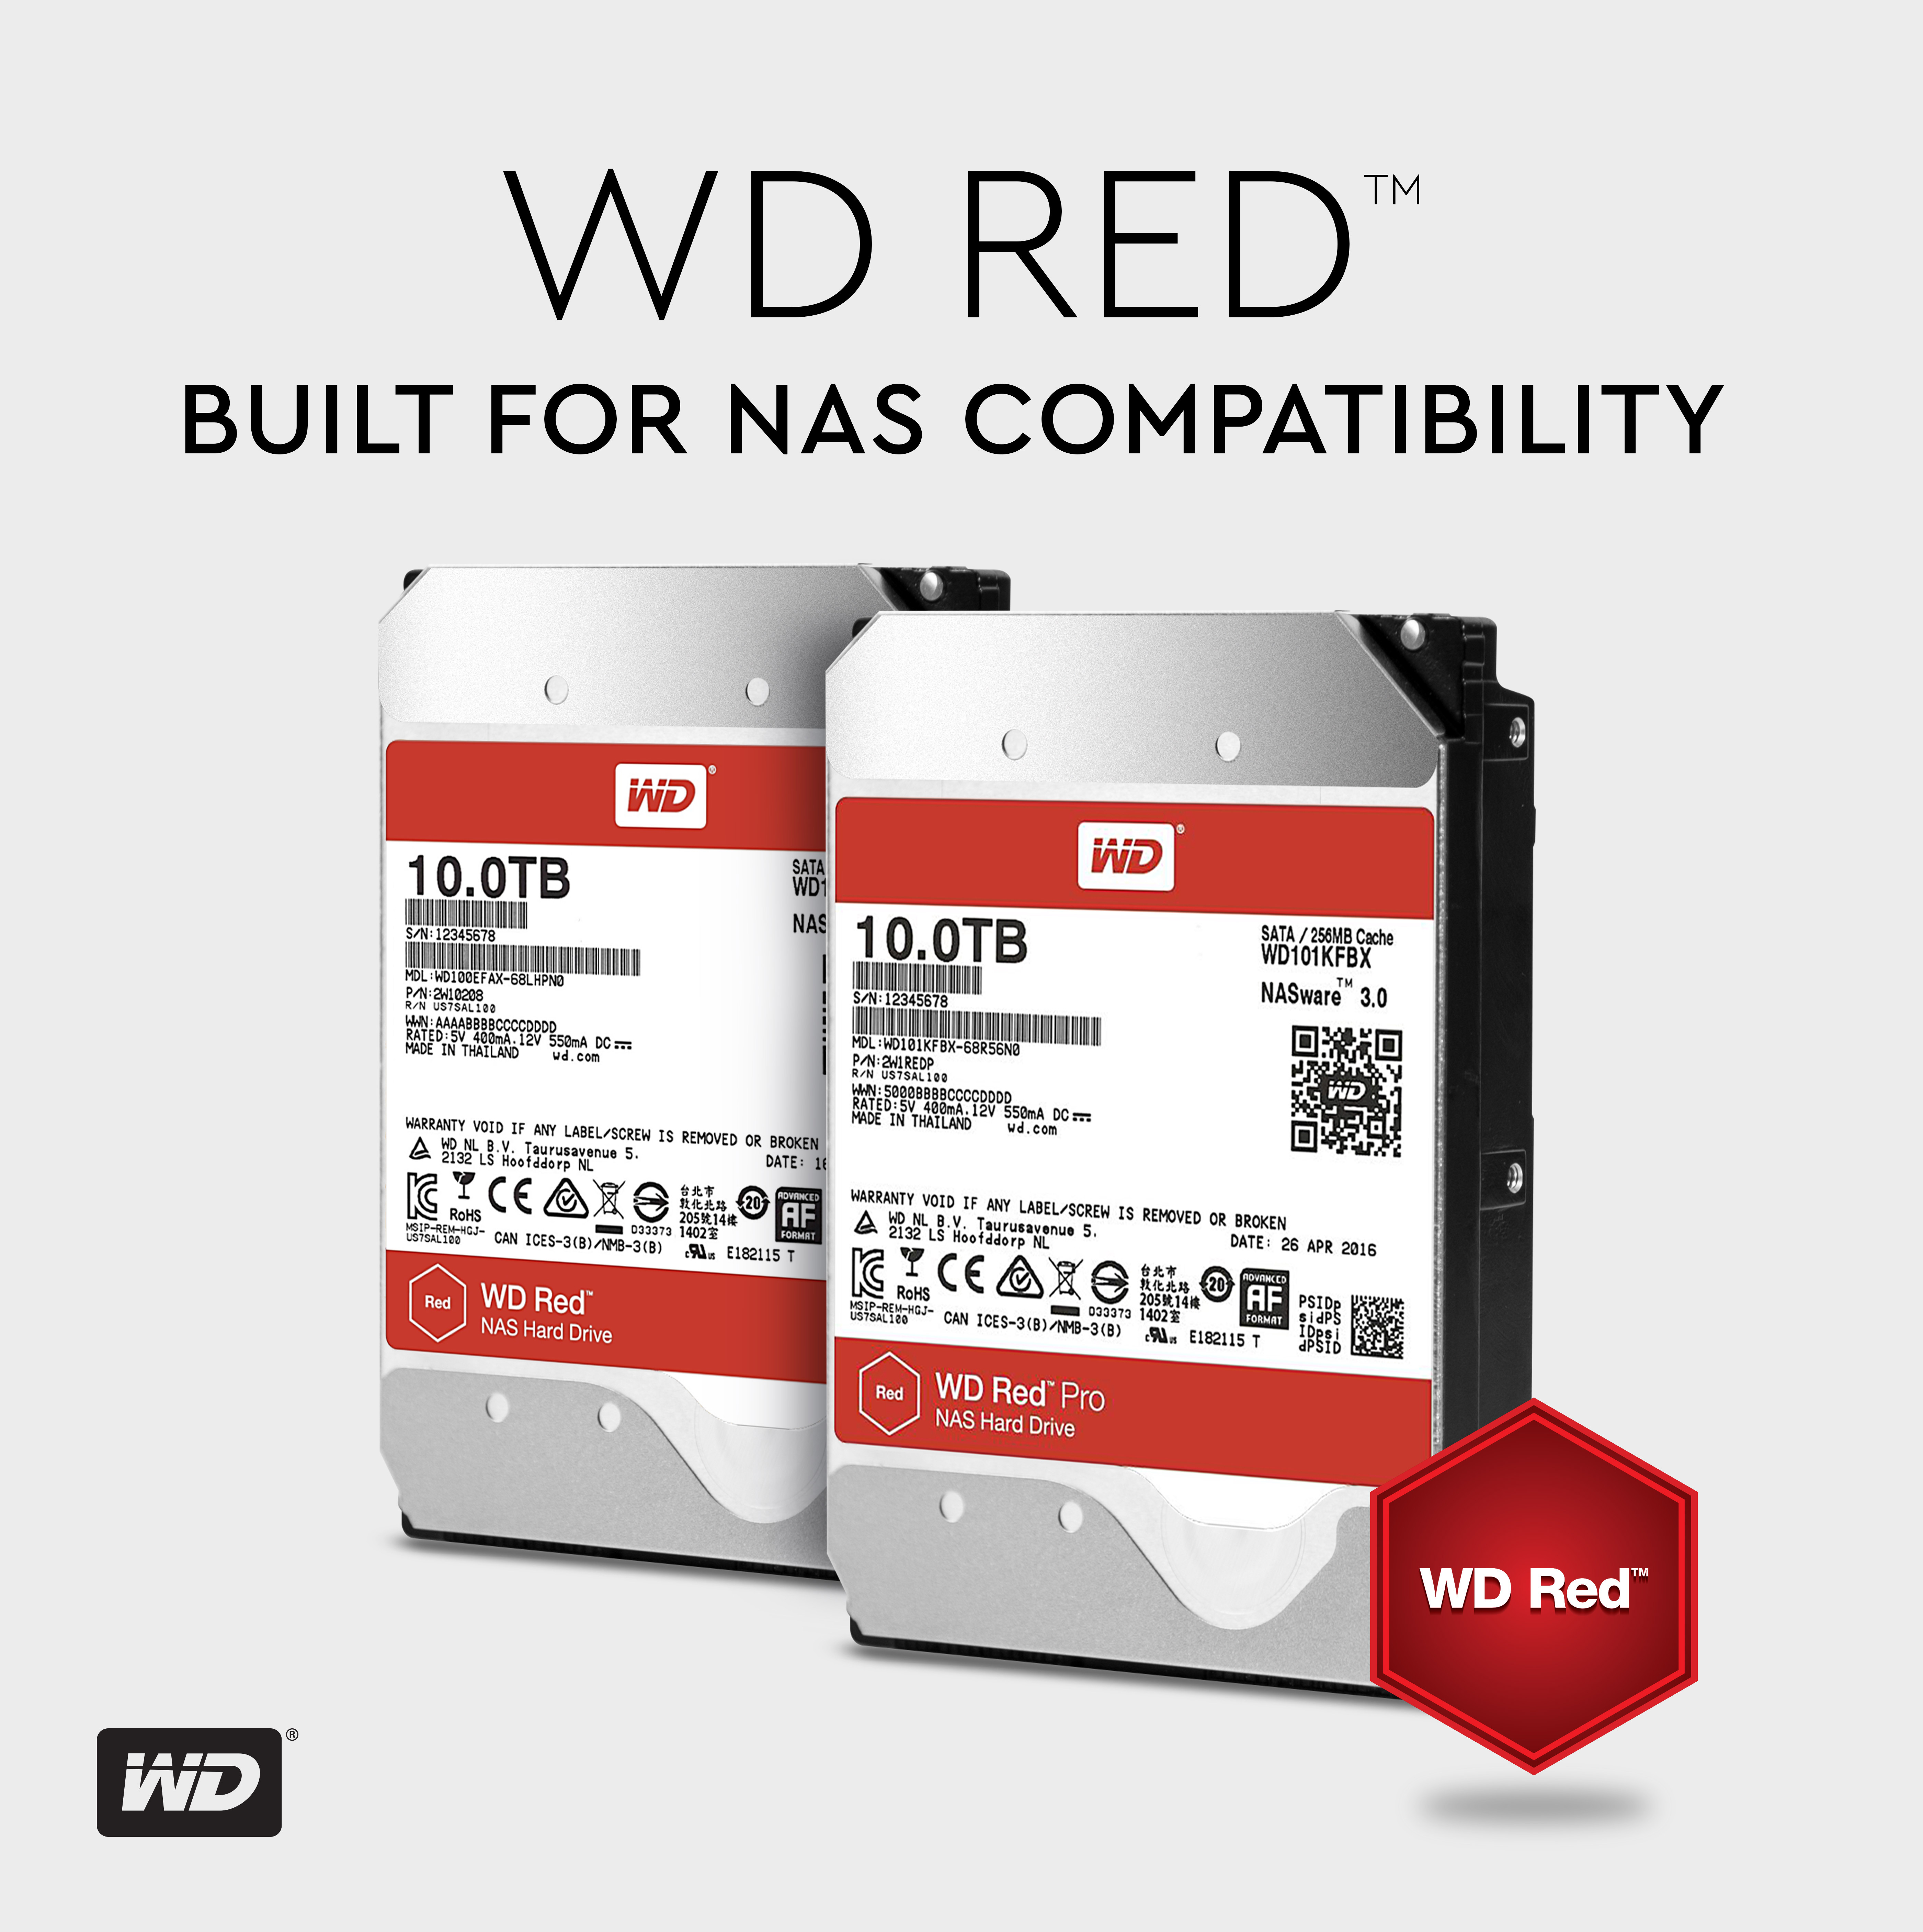 Western Digital Expands Hard Drive Offerings to 10TB With Advanced Storage Helium-Based WD Red and WD Pro Hard Drives | Business Wire